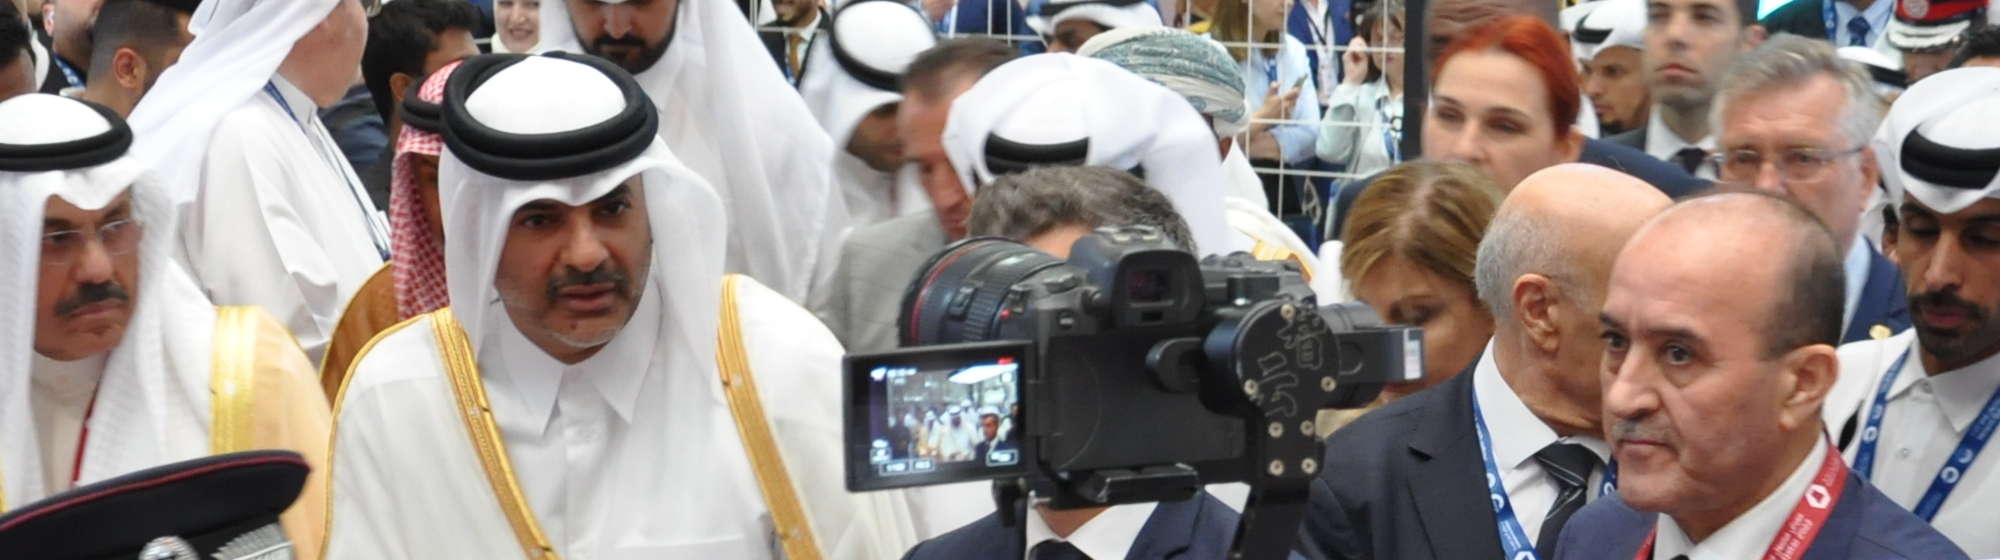 Journalists covering the opening ceremony of Milipol Qatar